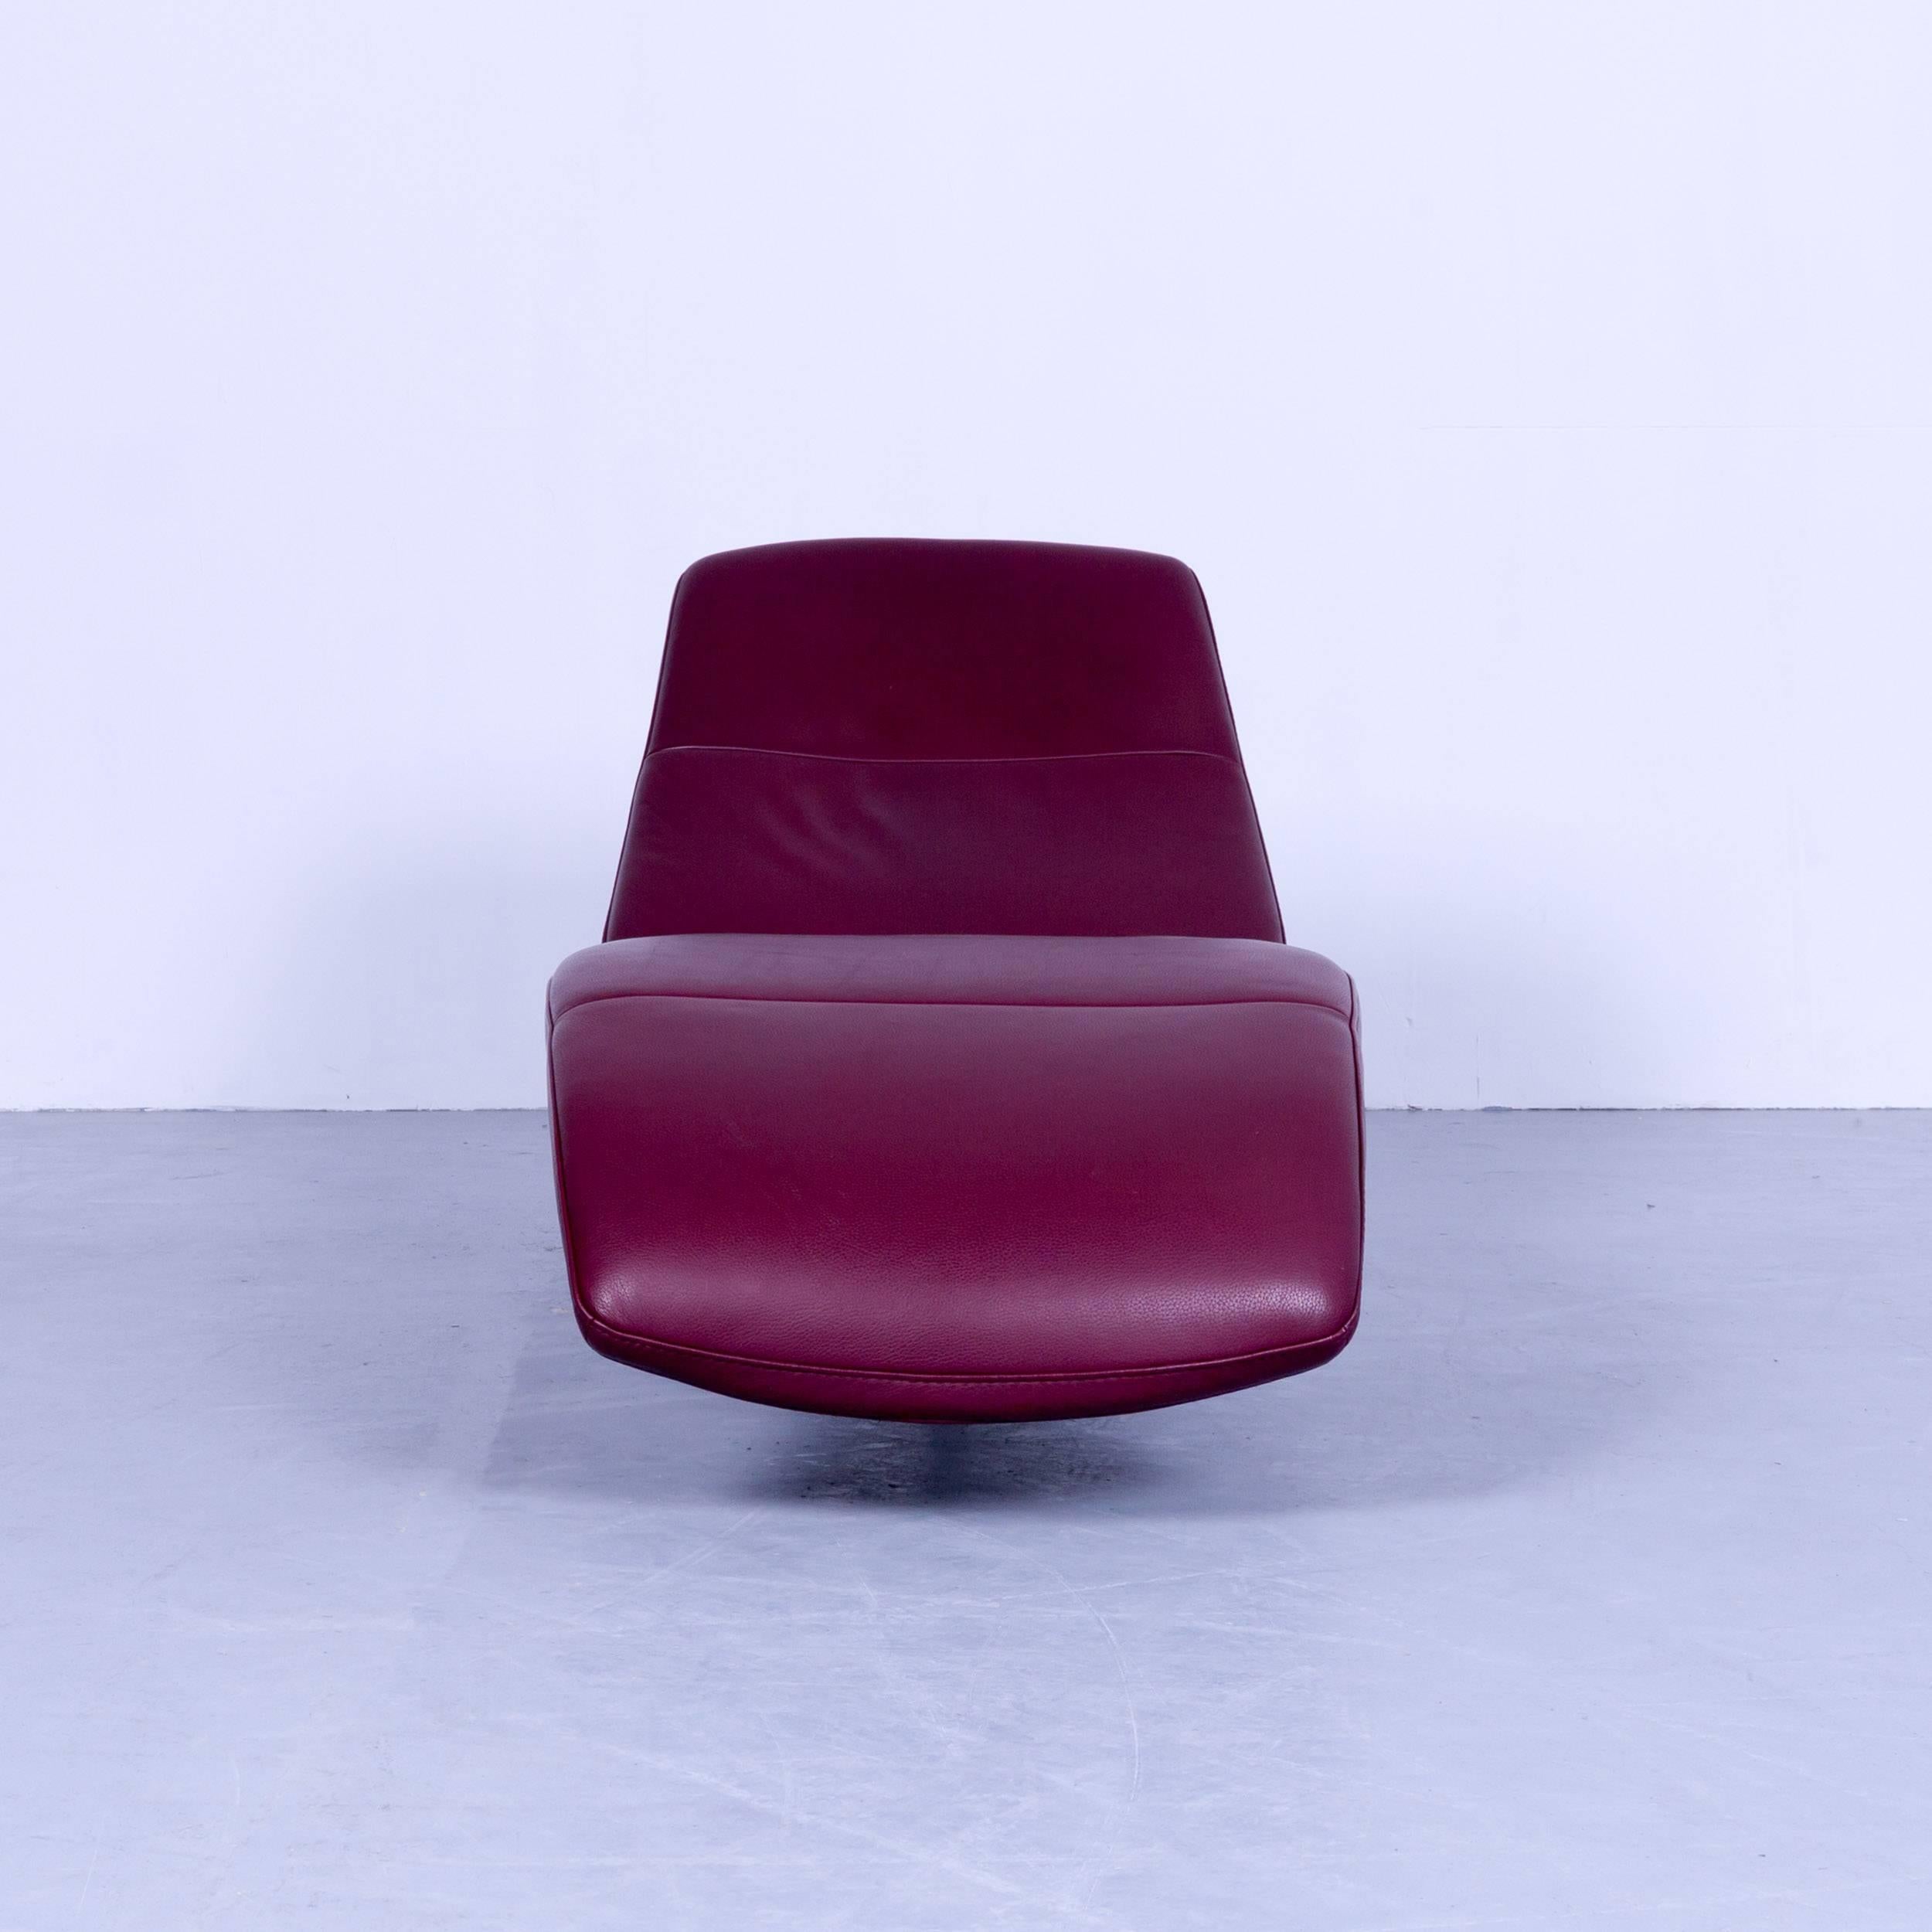 Ewald Schillig slice daybed designer recliner chair leather red bordeaux, in a minimalistic and modern design, made for pure comfort.